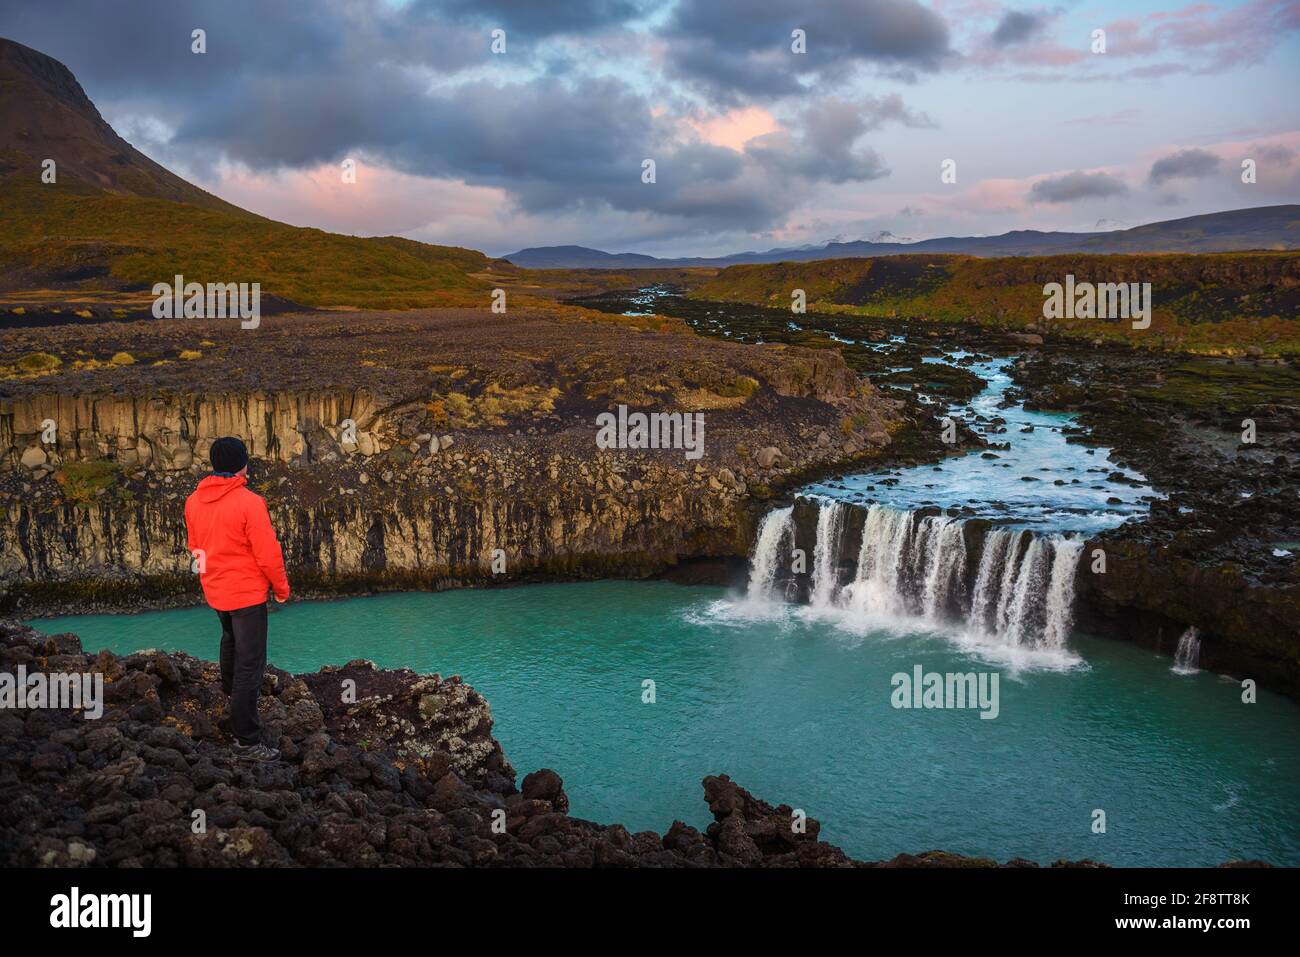 Hiker standing at the edge of the Thjofafoss waterfall in Iceland Stock Photo